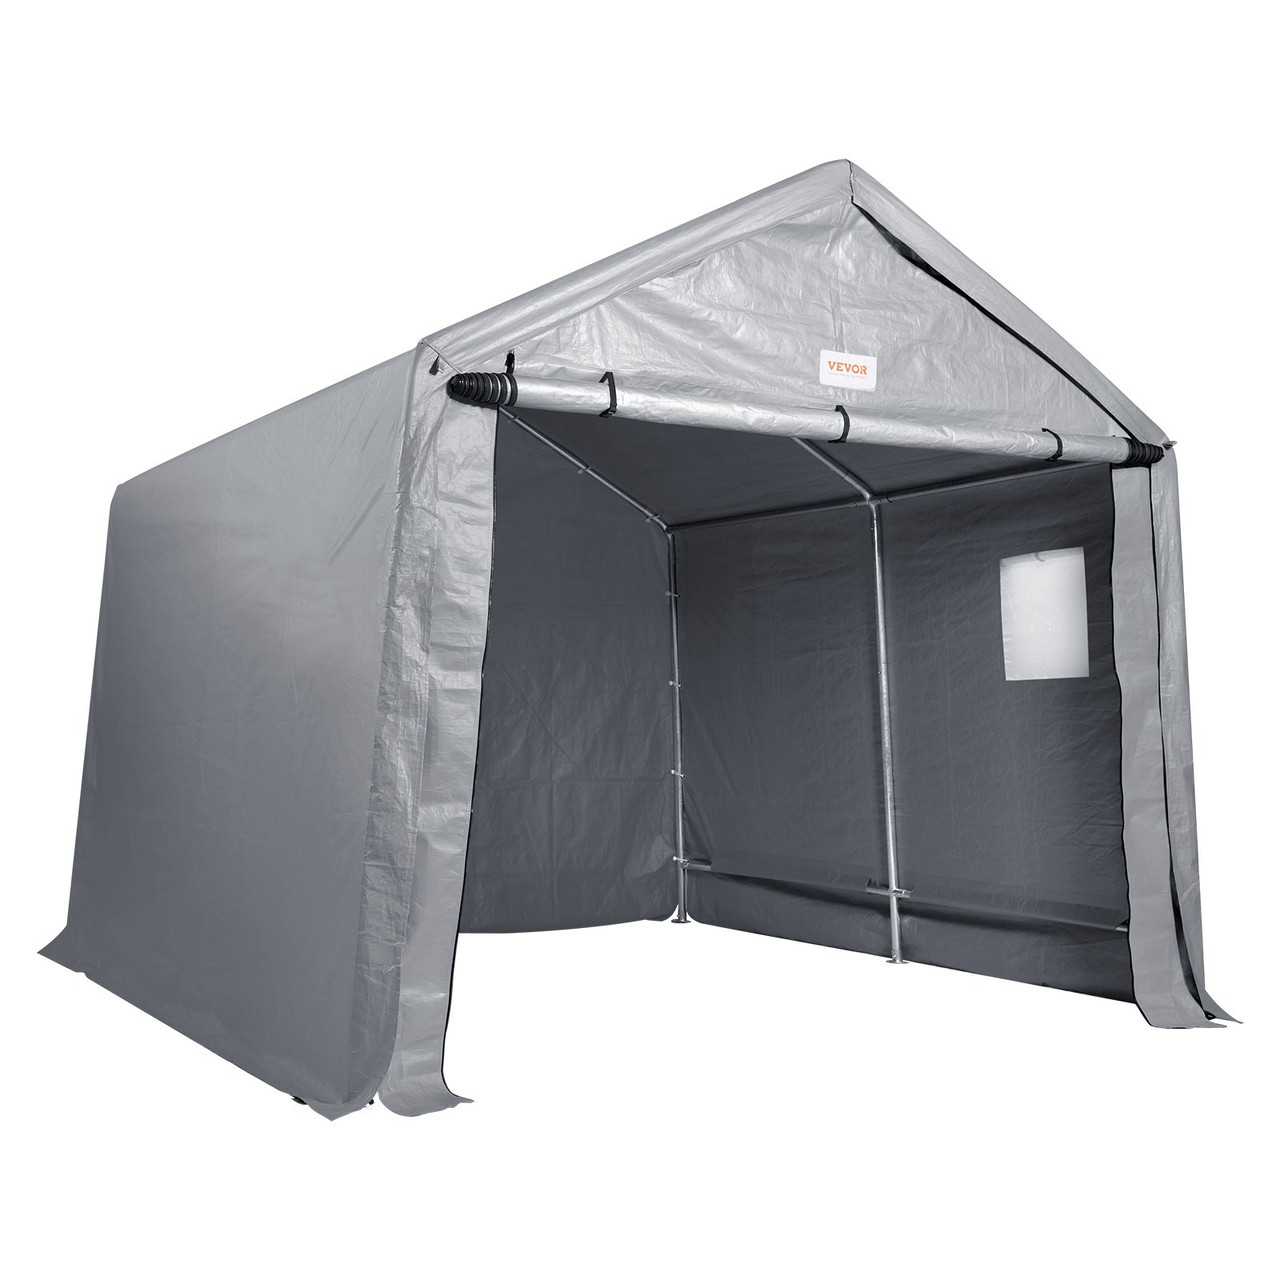 VEVOR Portable Shed Outdoor Storage Shelter 8 x 14 x 7.6 ft Heavy Duty Instant Storage Tent Tarp Sheds with Roll-Up Zipper Door and Ventilated